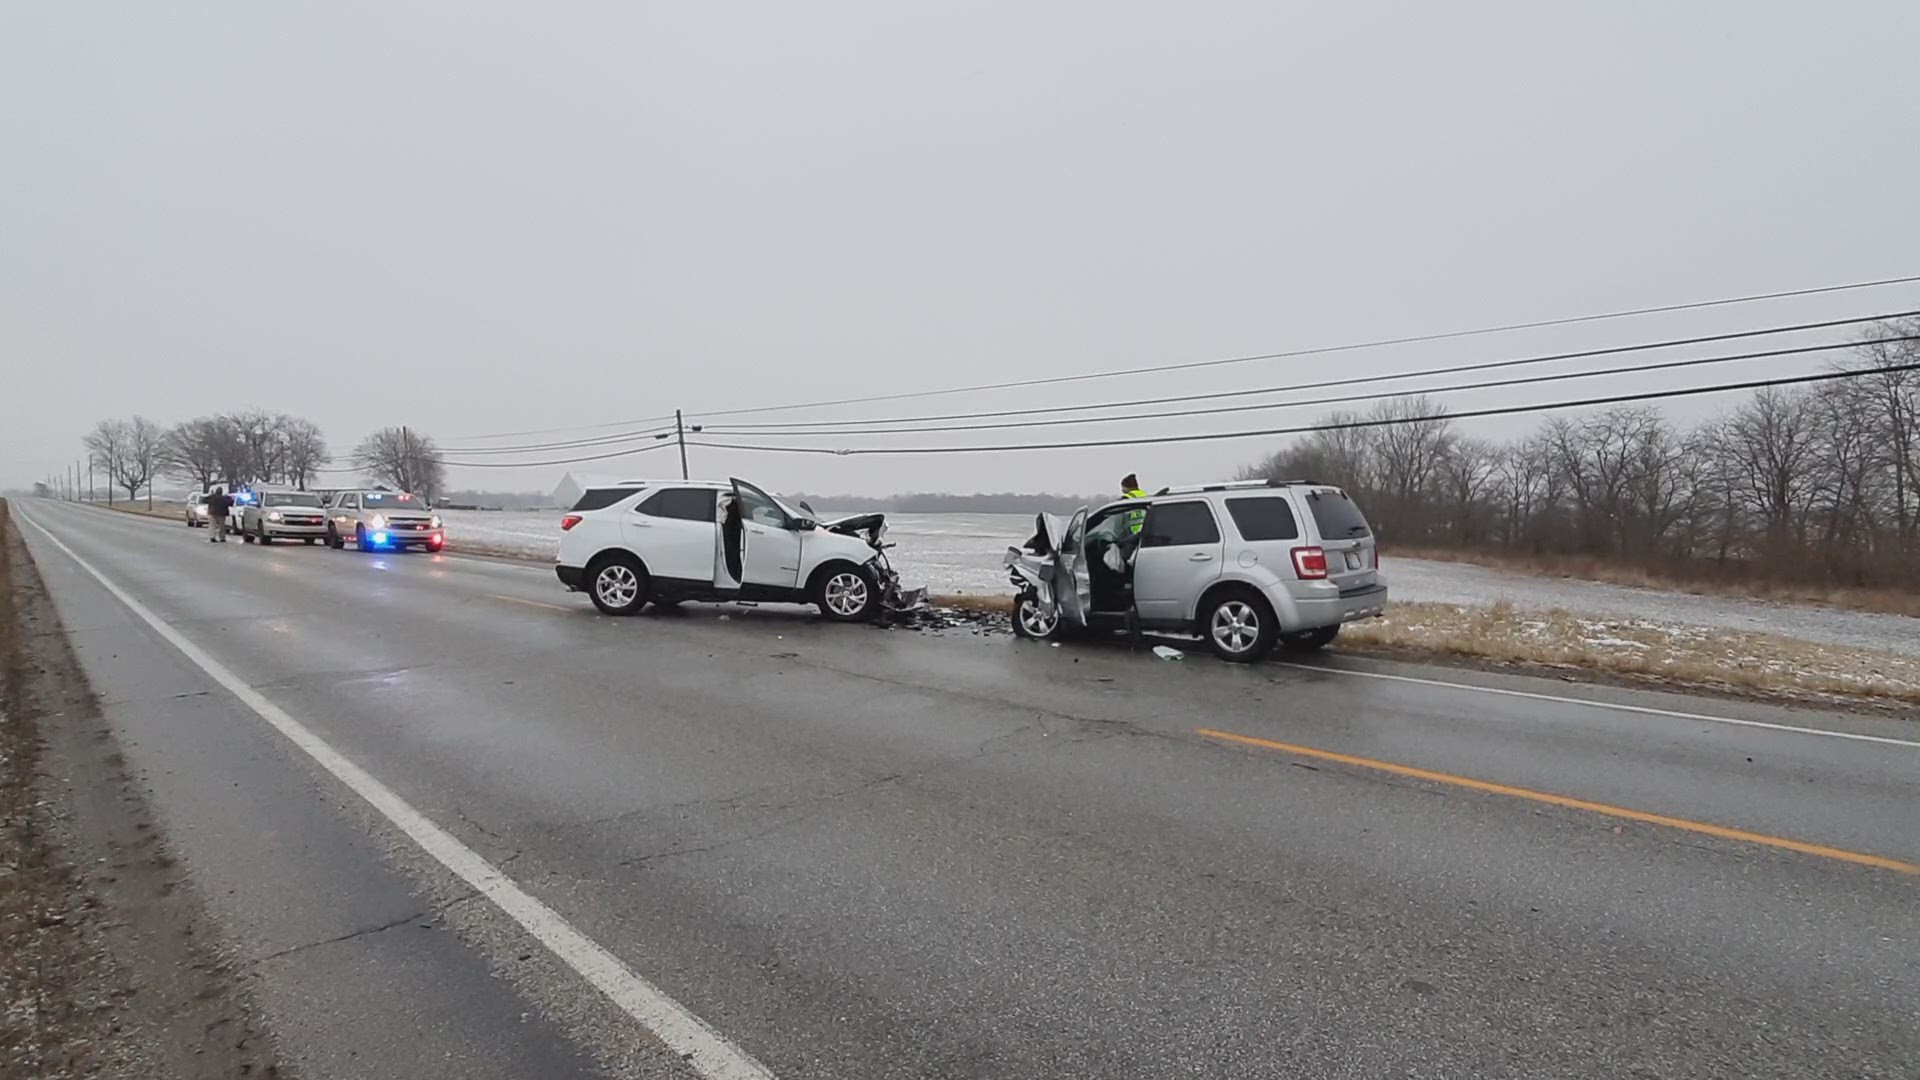 A New Palestine woman was killed Sunday morning in a crash on U.S. 52.